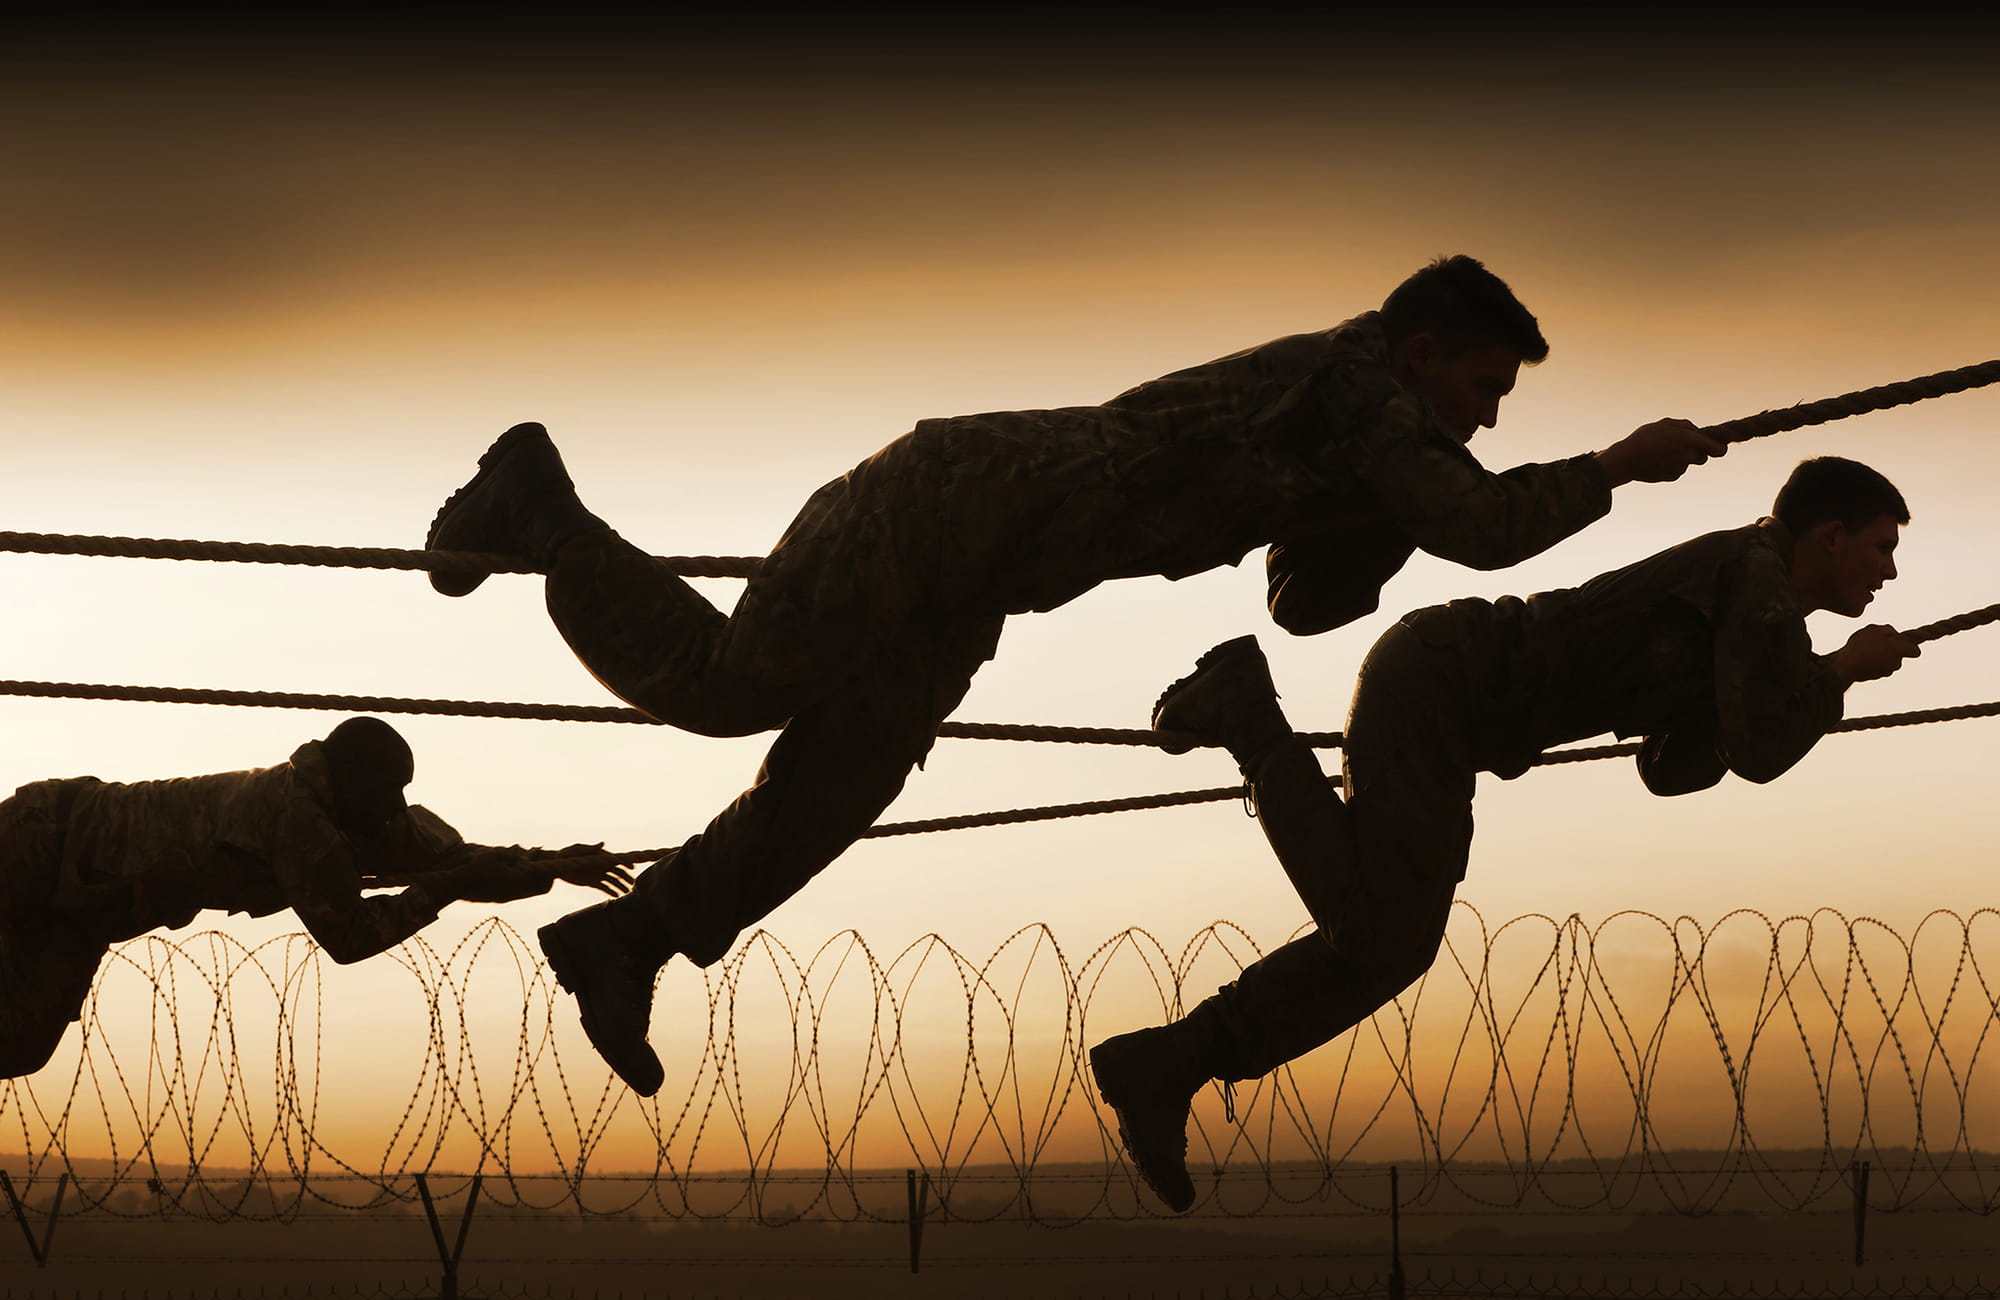 Silhouettes of Royal Navy personnel climbing along ropes above barbed wire